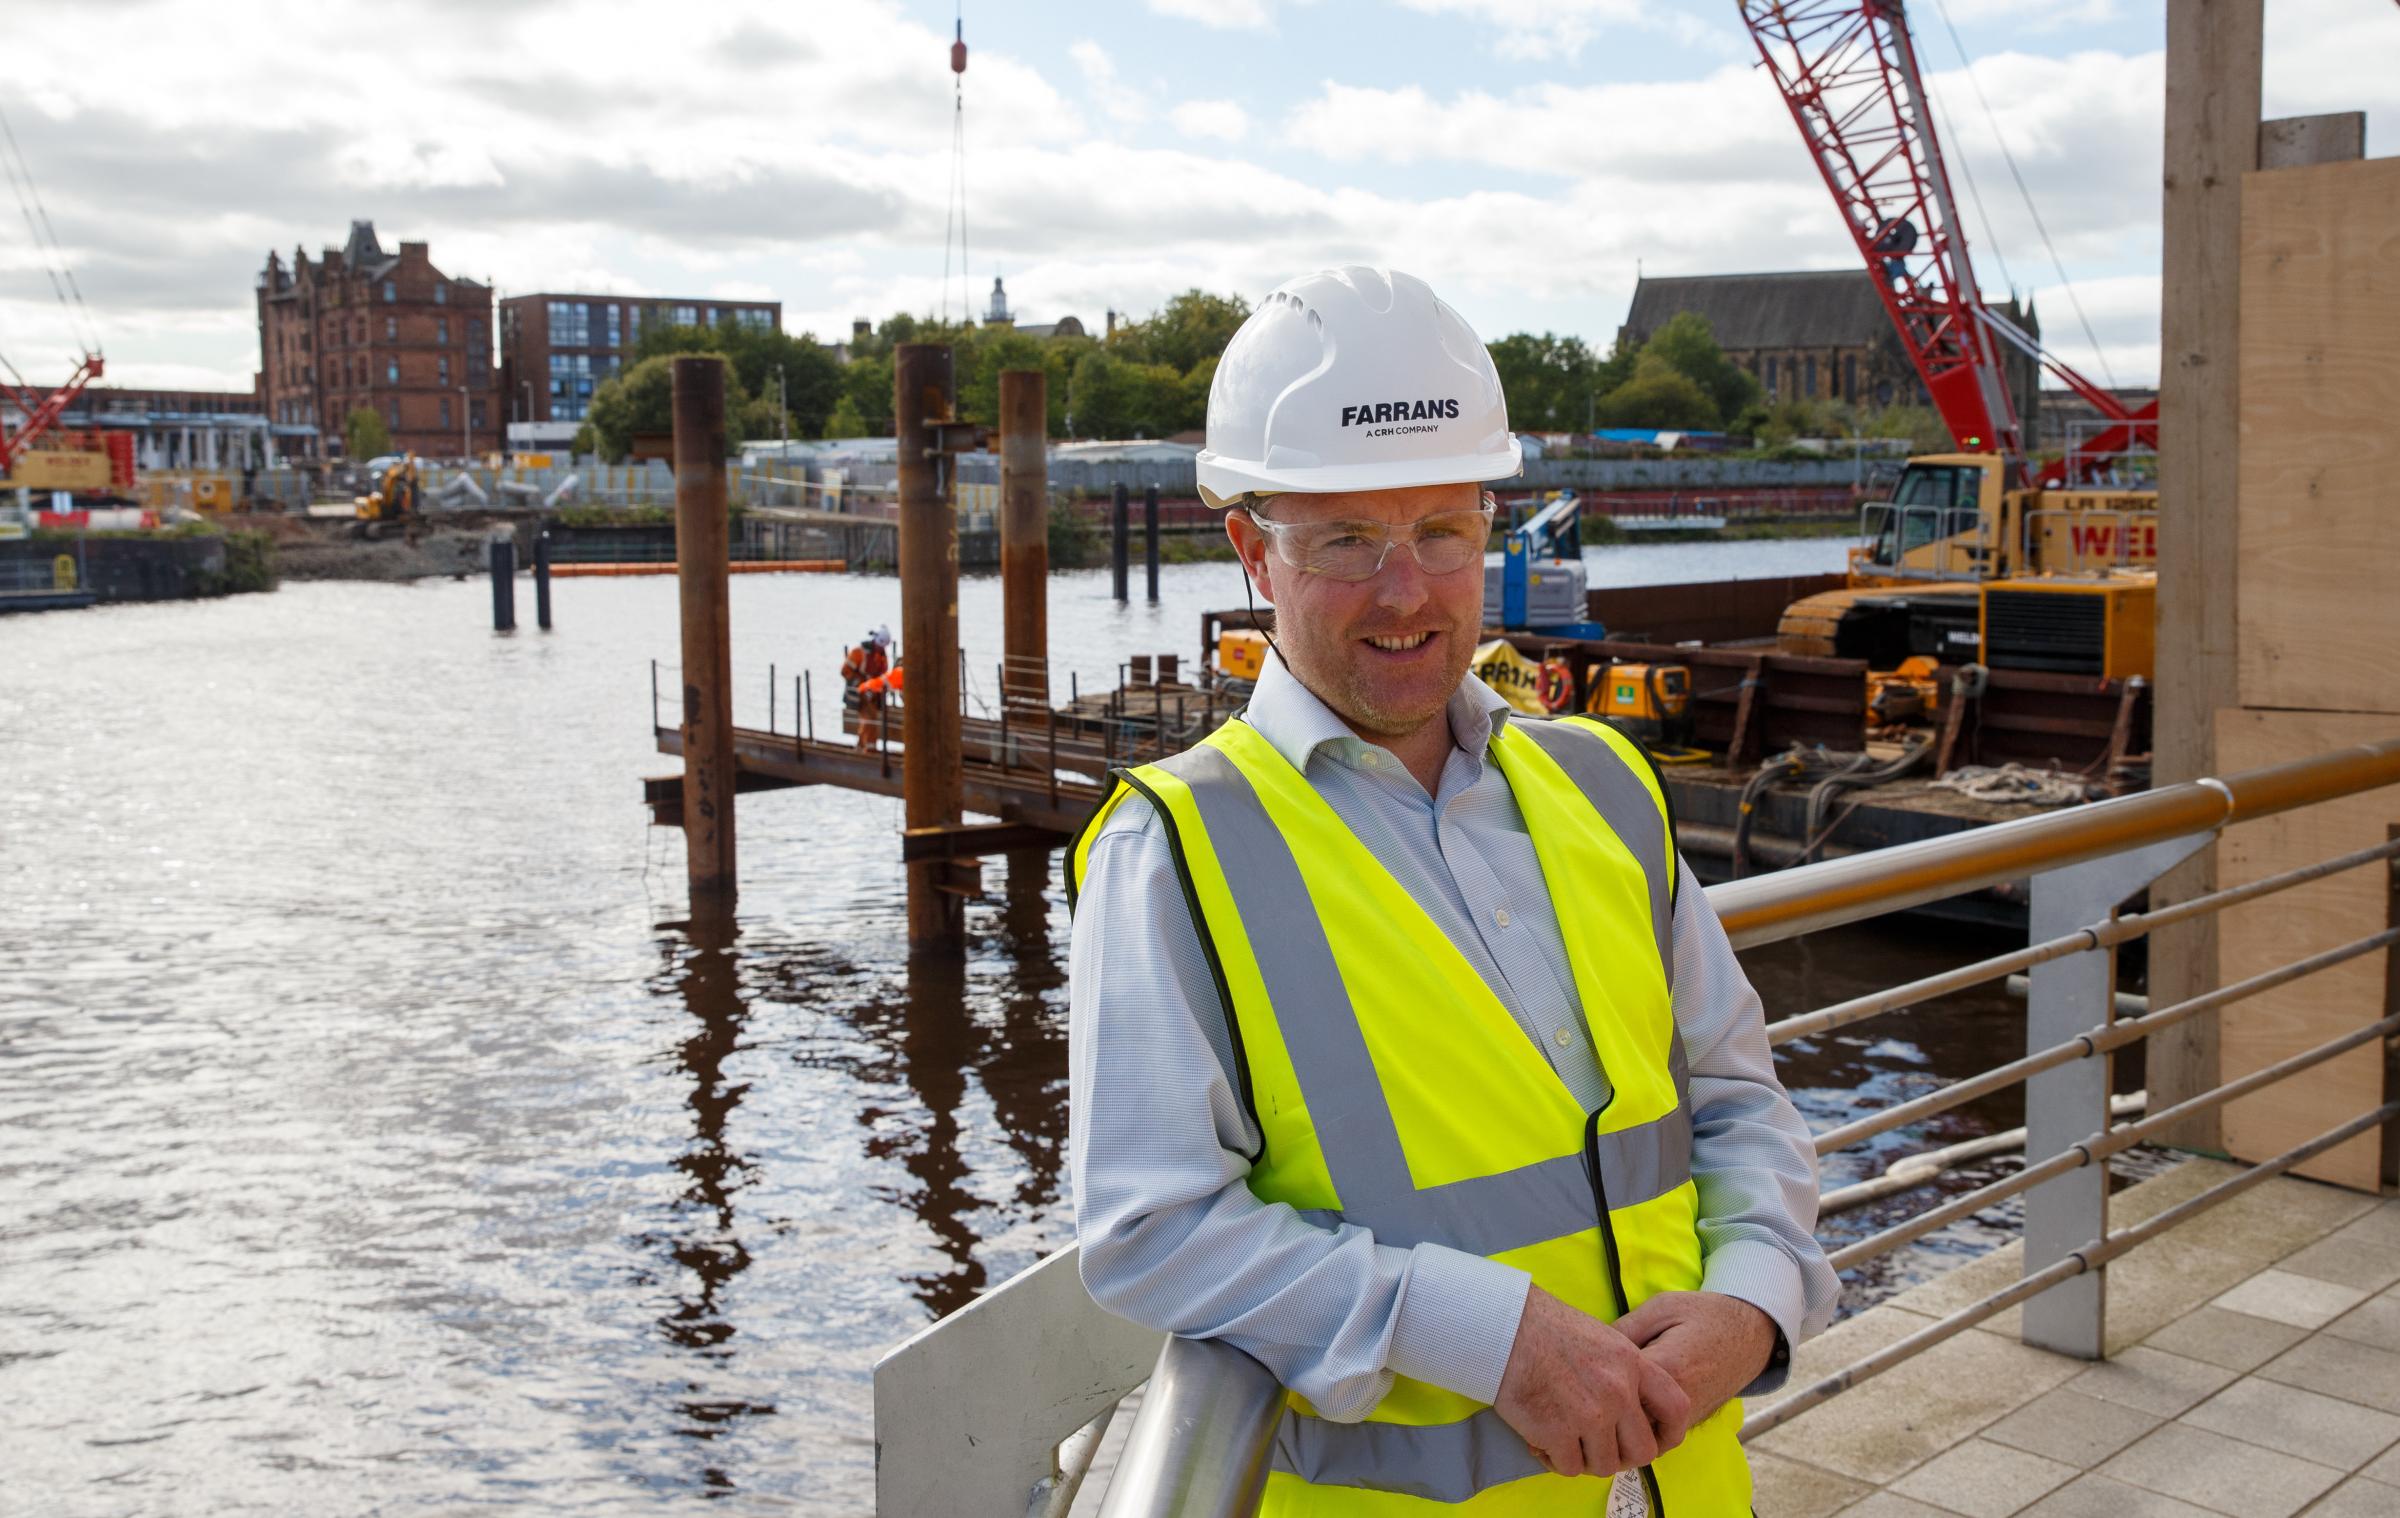 Pictured is David Buchanan of Farrans. David is the project manager of the new Govan-Partick Bridge. Construction of the Govan-Partick pedestrian bridge in Glasgow. Photograph by Colin Mearns.